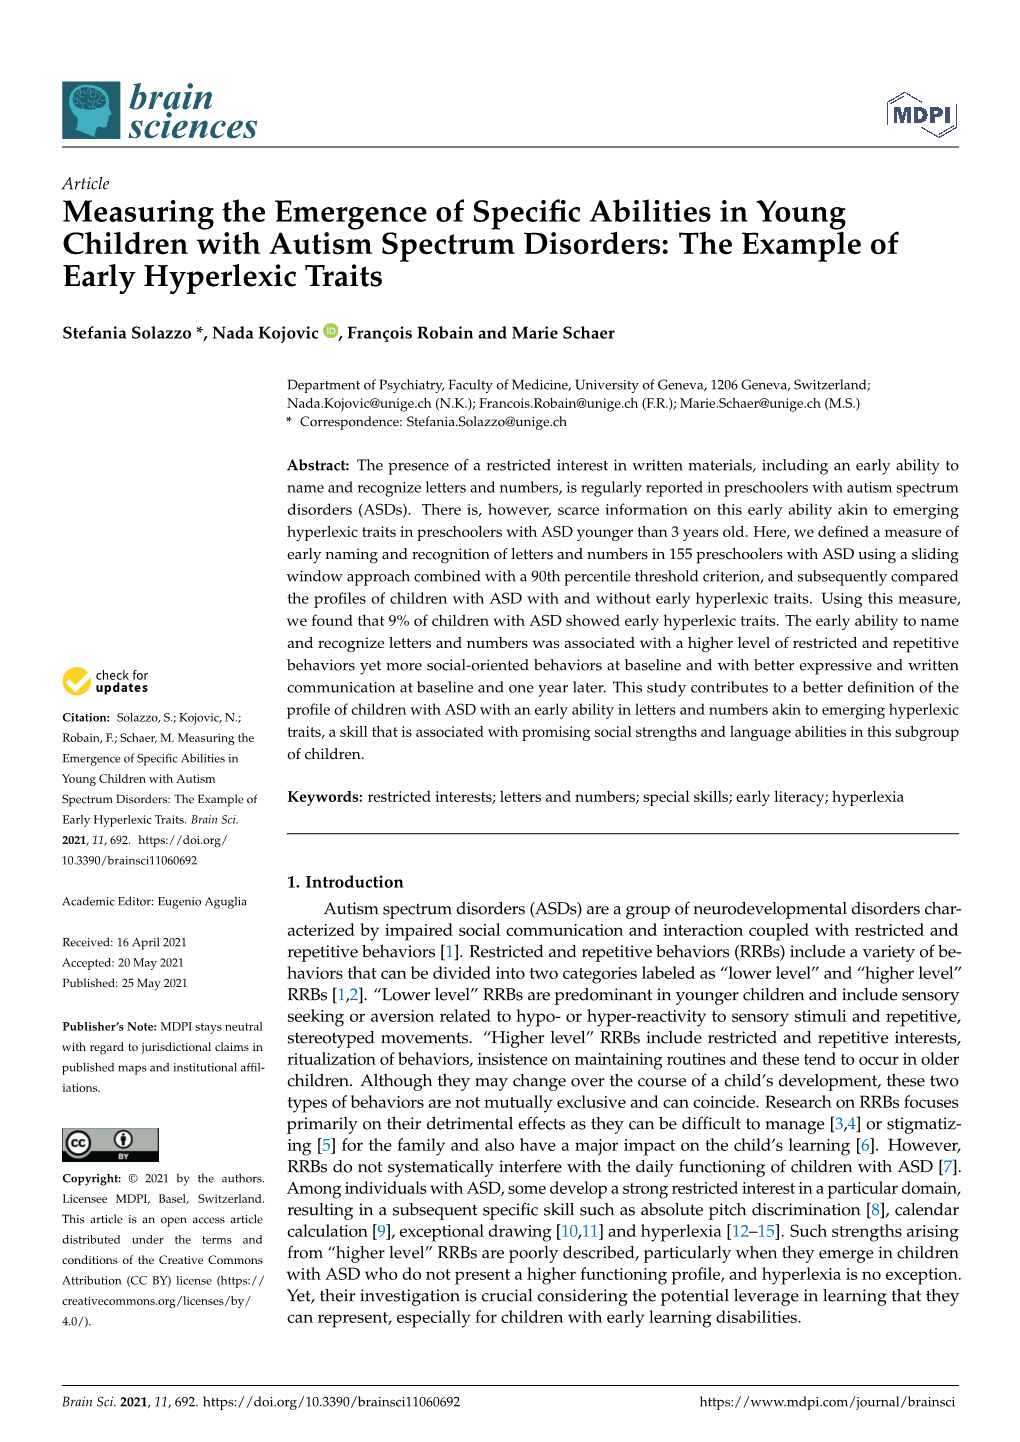 Measuring the Emergence of Specific Abilities in Young Children With